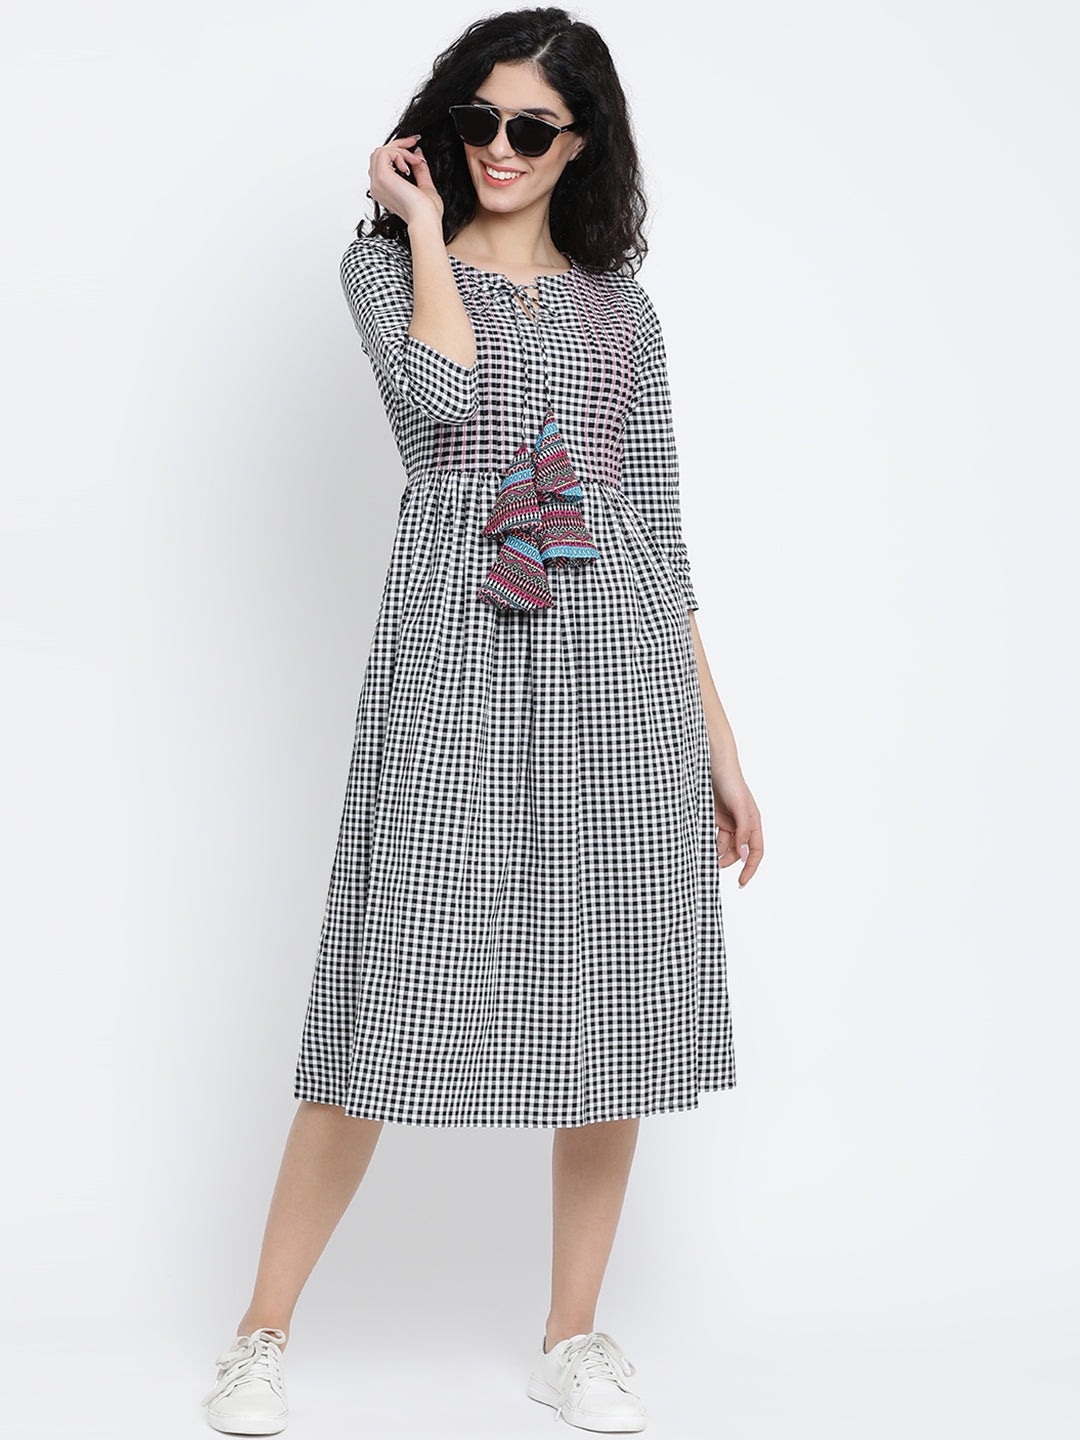 Black and White Check Cotton Dress With Pintucks, Top Stitch and Colourful Tassles-Dresses-Fabnest